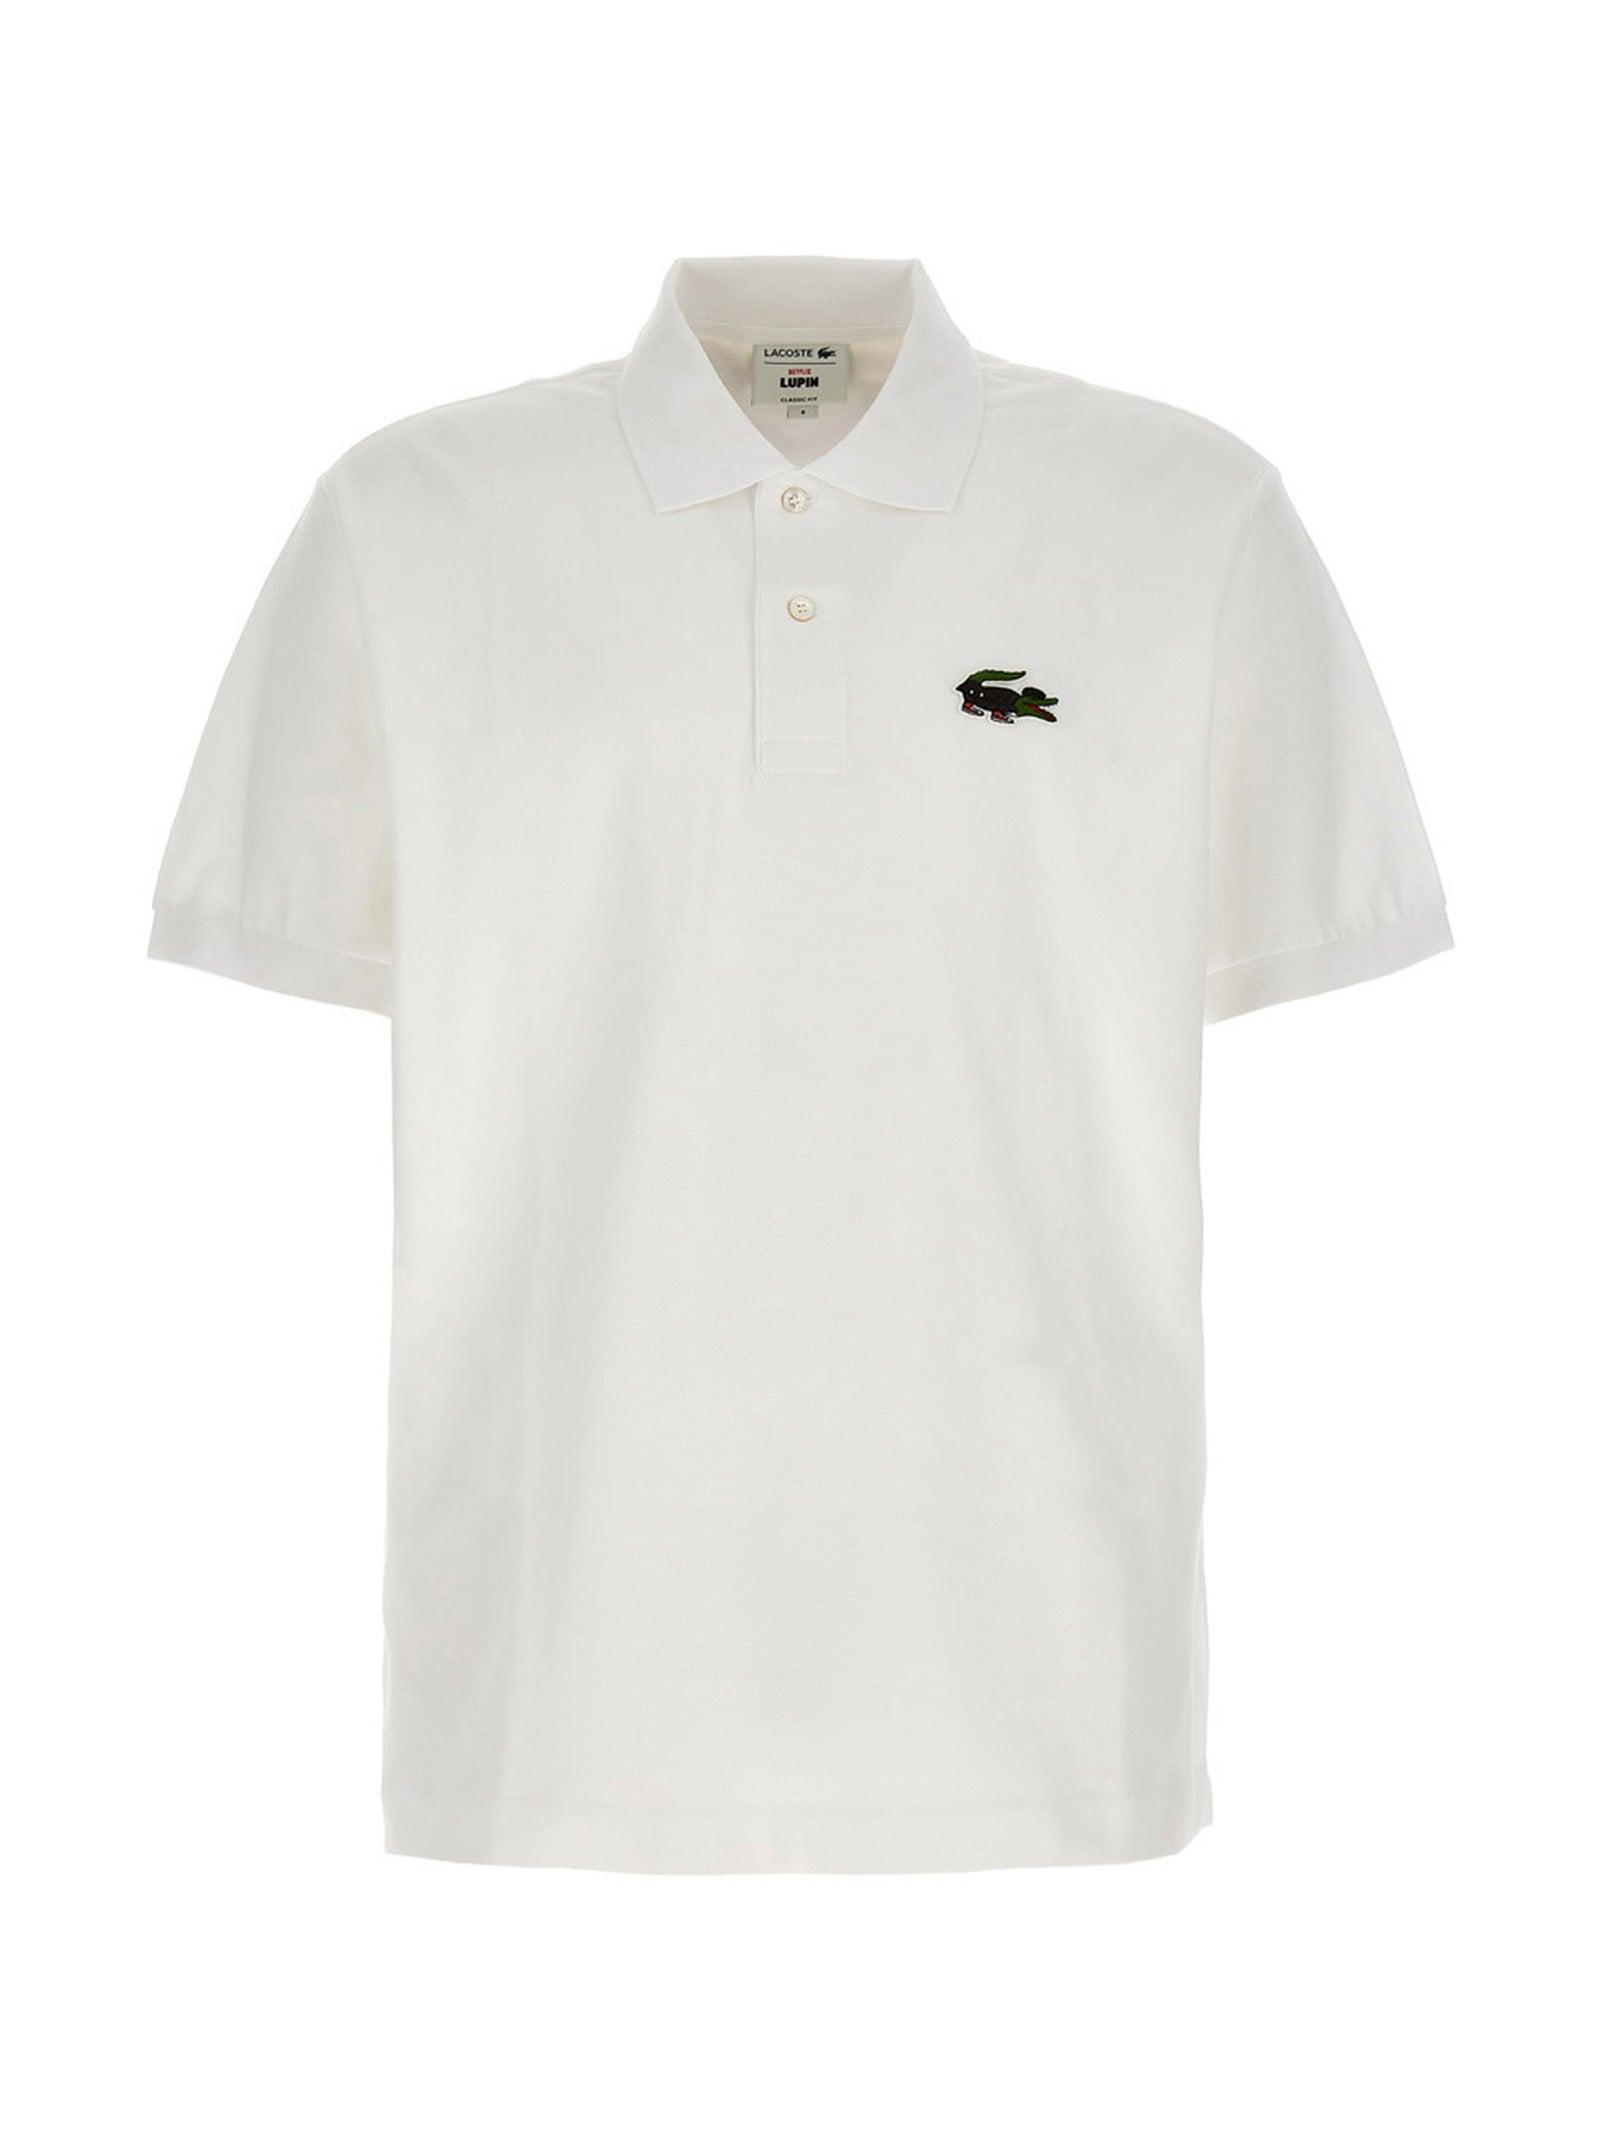 Lacoste Polo 'lupin' Capsule Netlifx in White for Men | Lyst